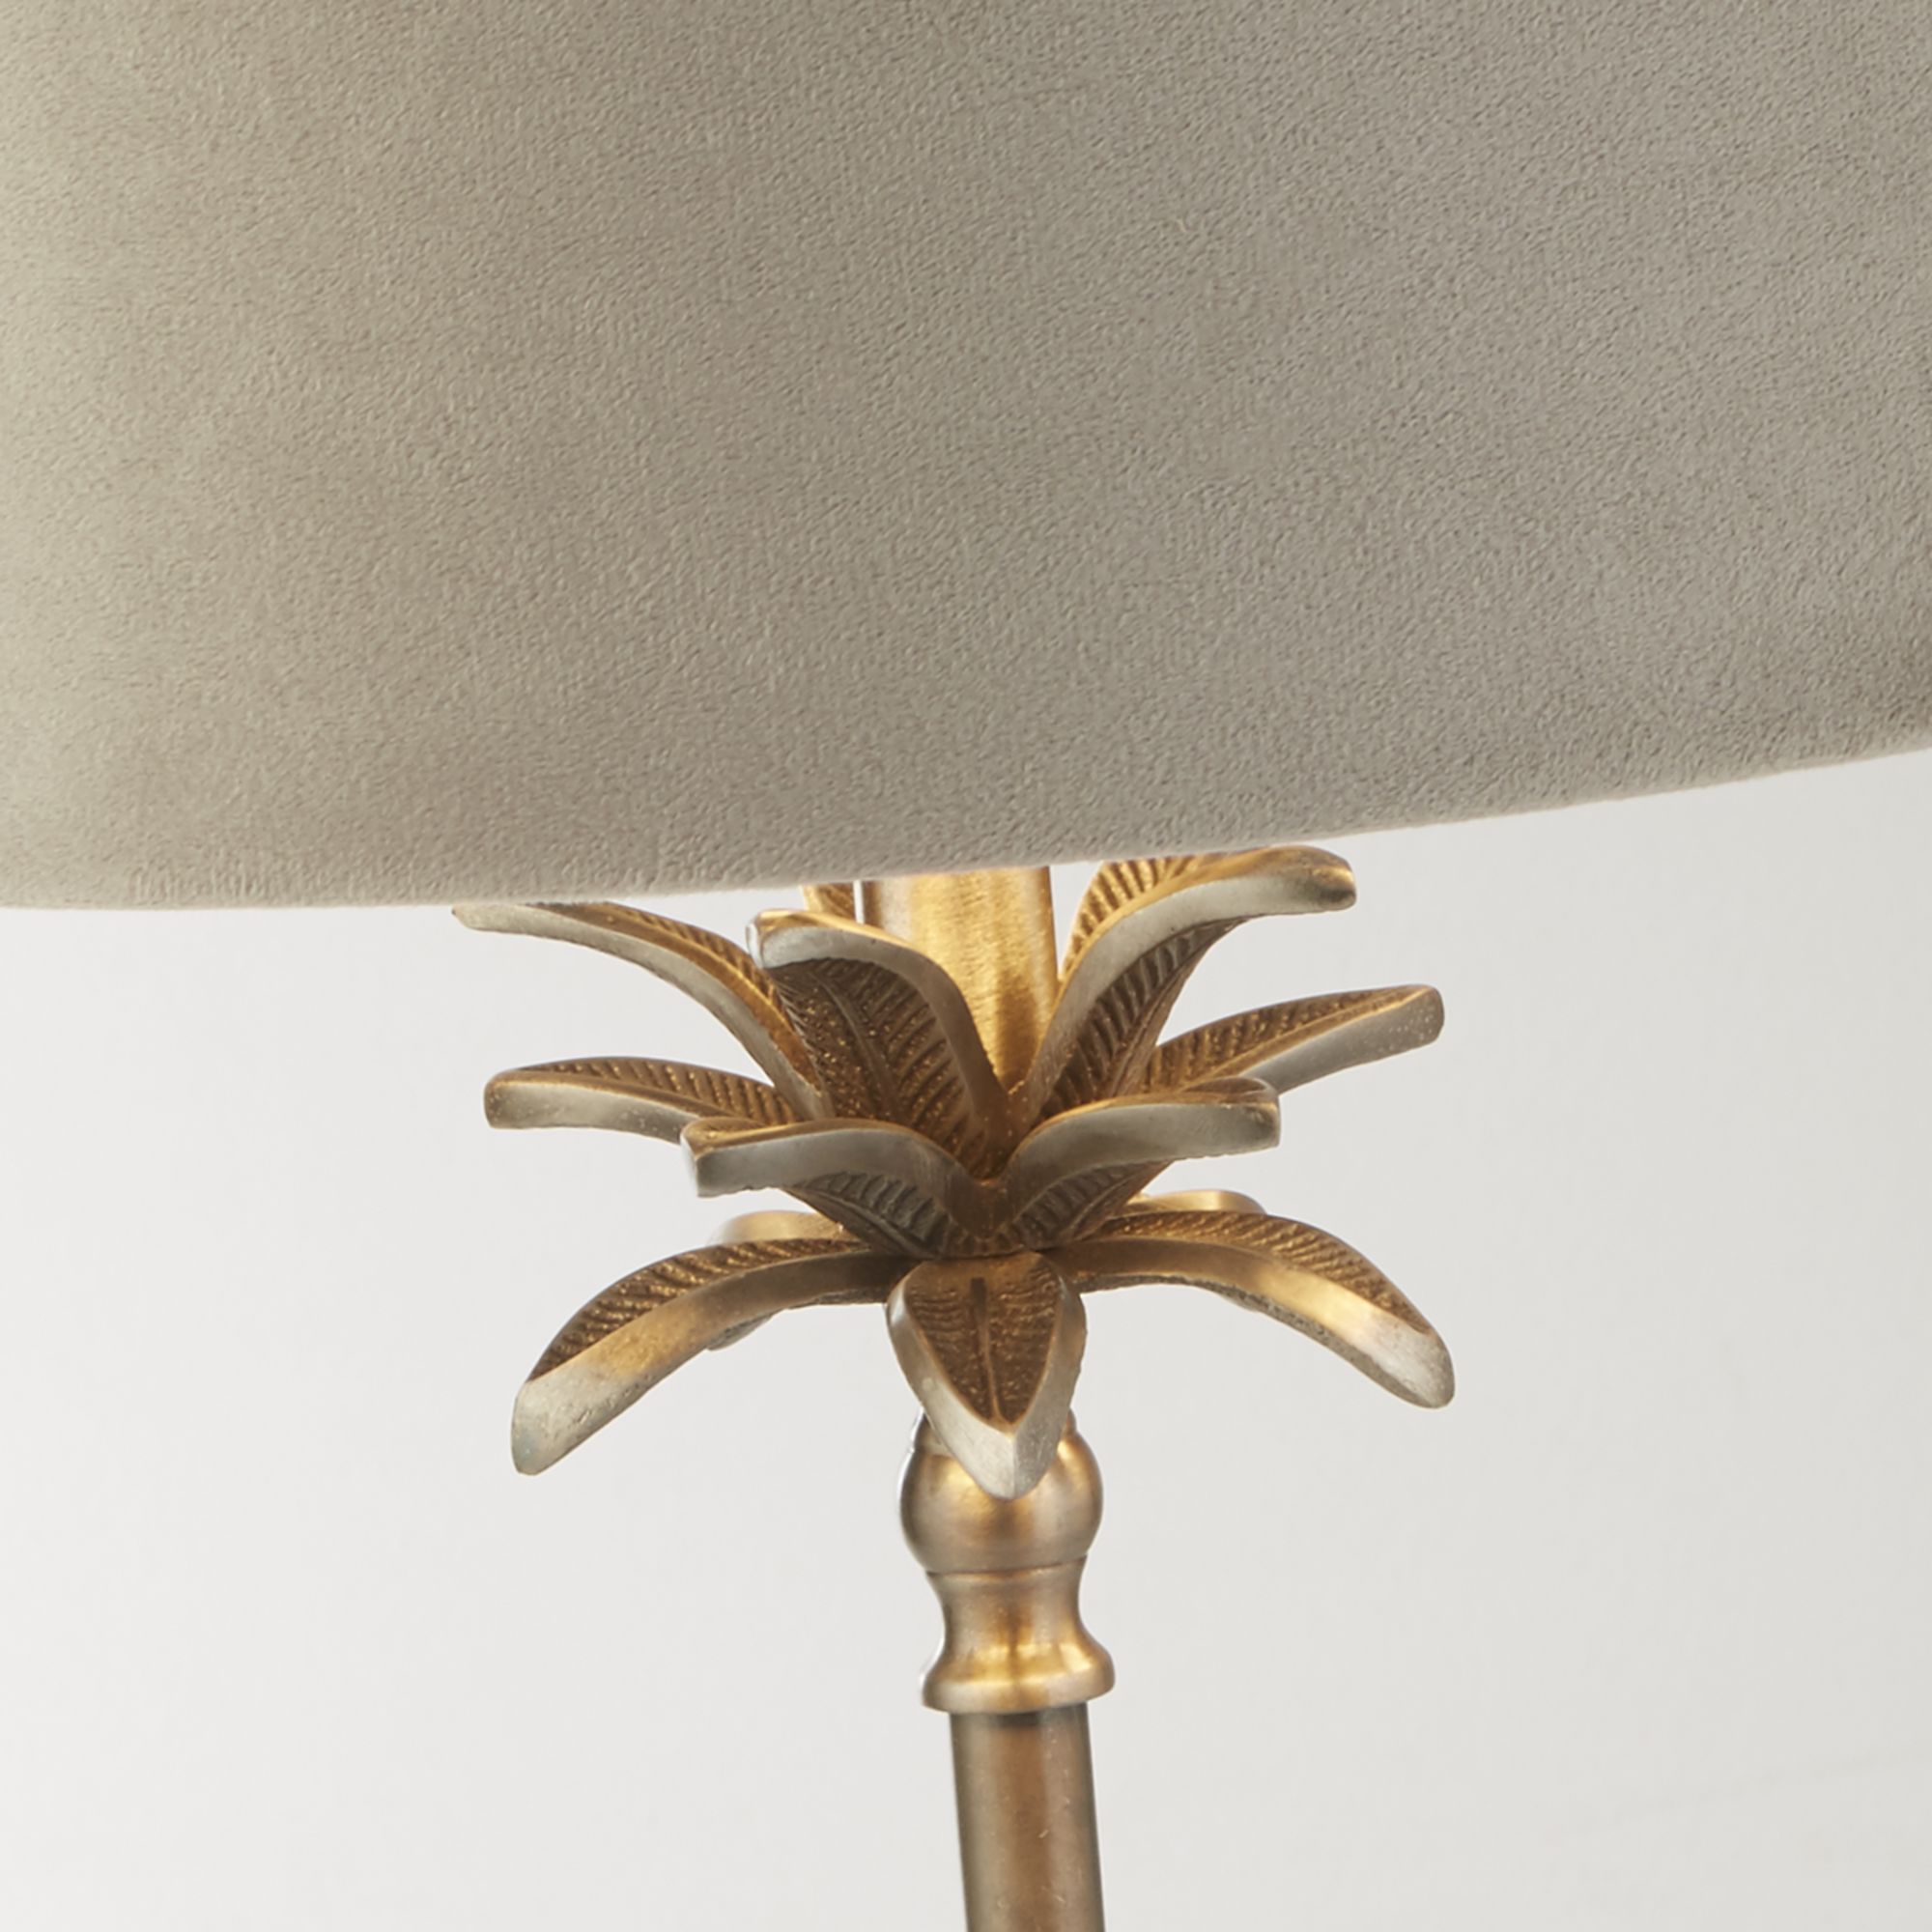 Palm Table Lamp - Antique Nickel Metal & Taupe Velvet Shade